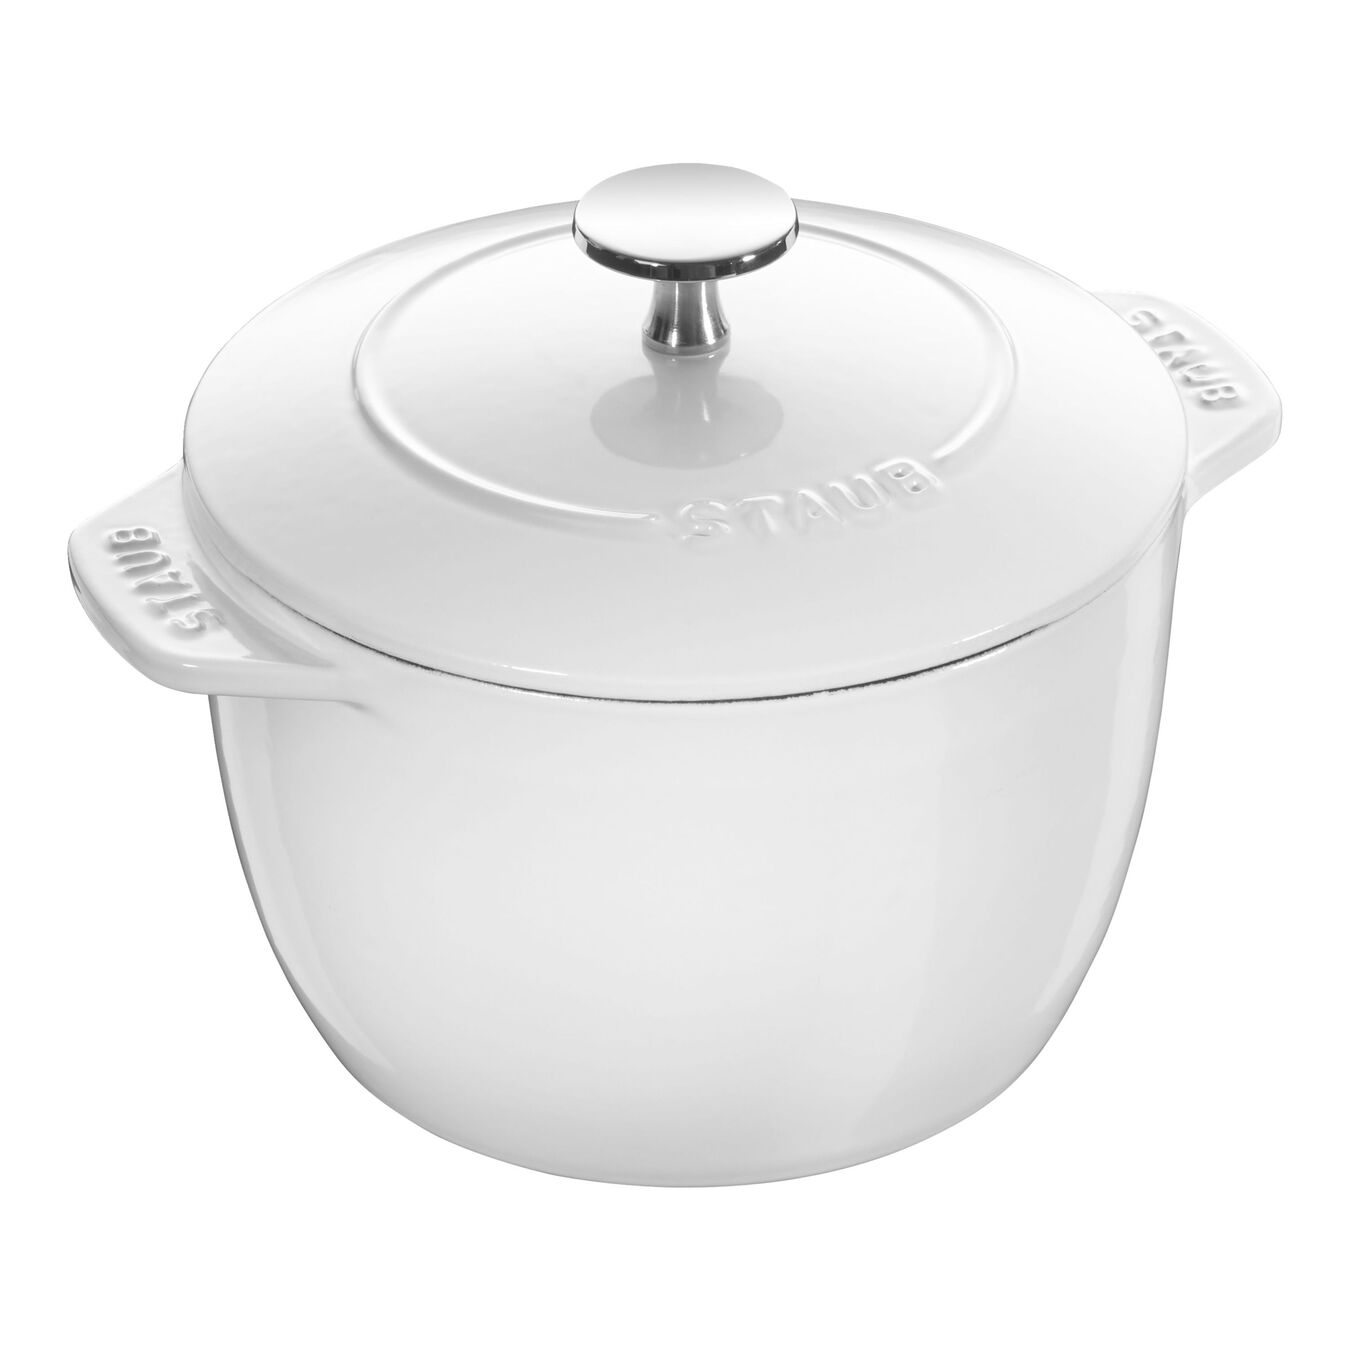 1.5 qt, Petite French Oven, white,,large 1